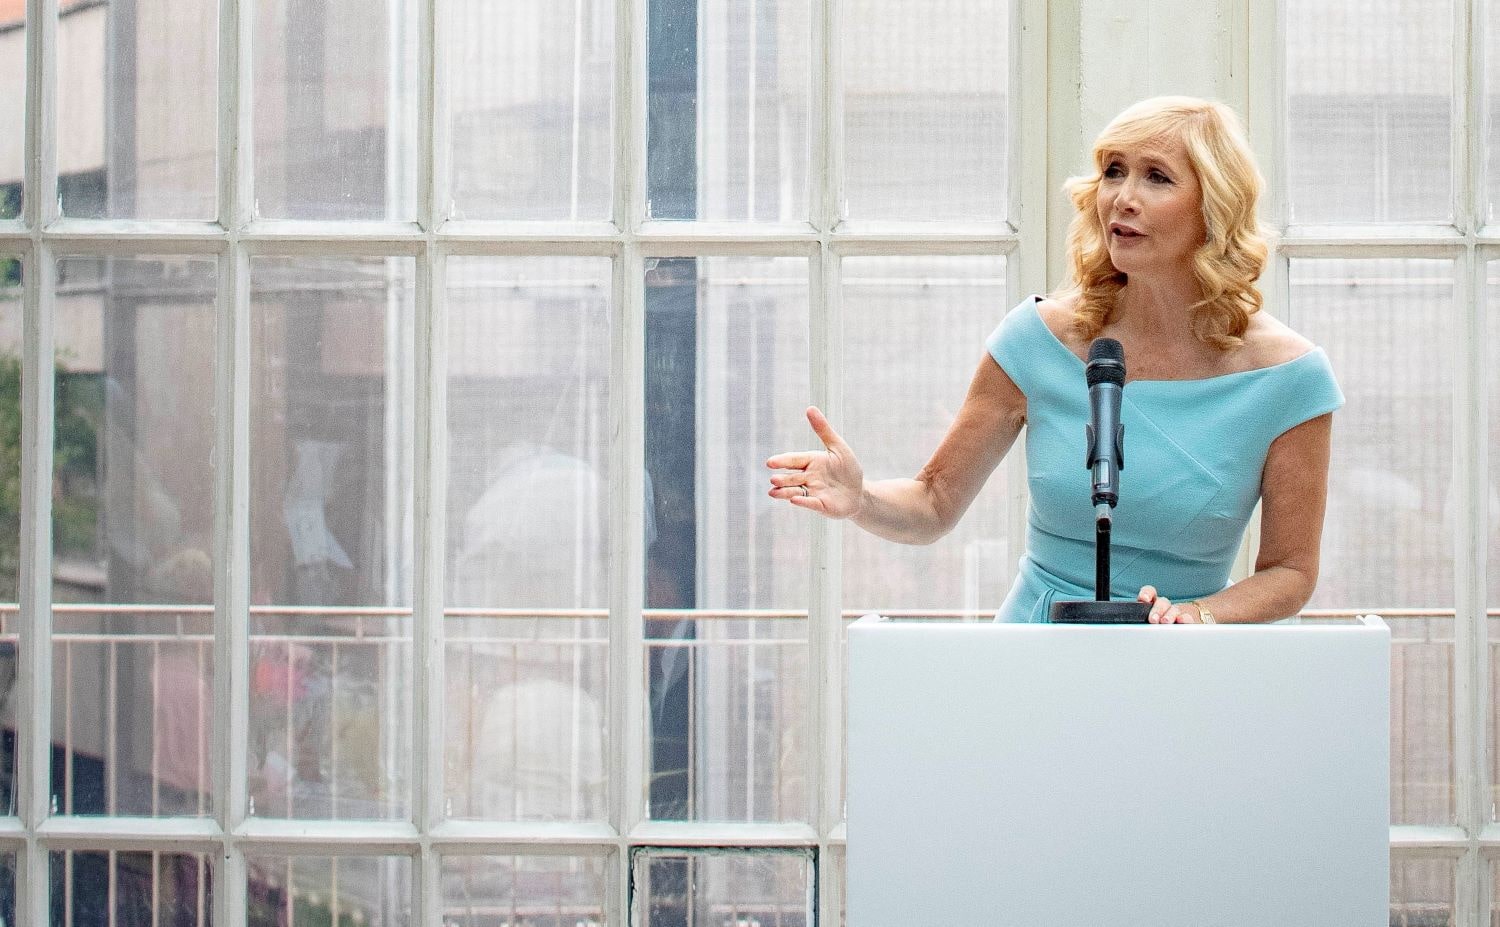 Tania Bryer speaking at an event in front of a large window